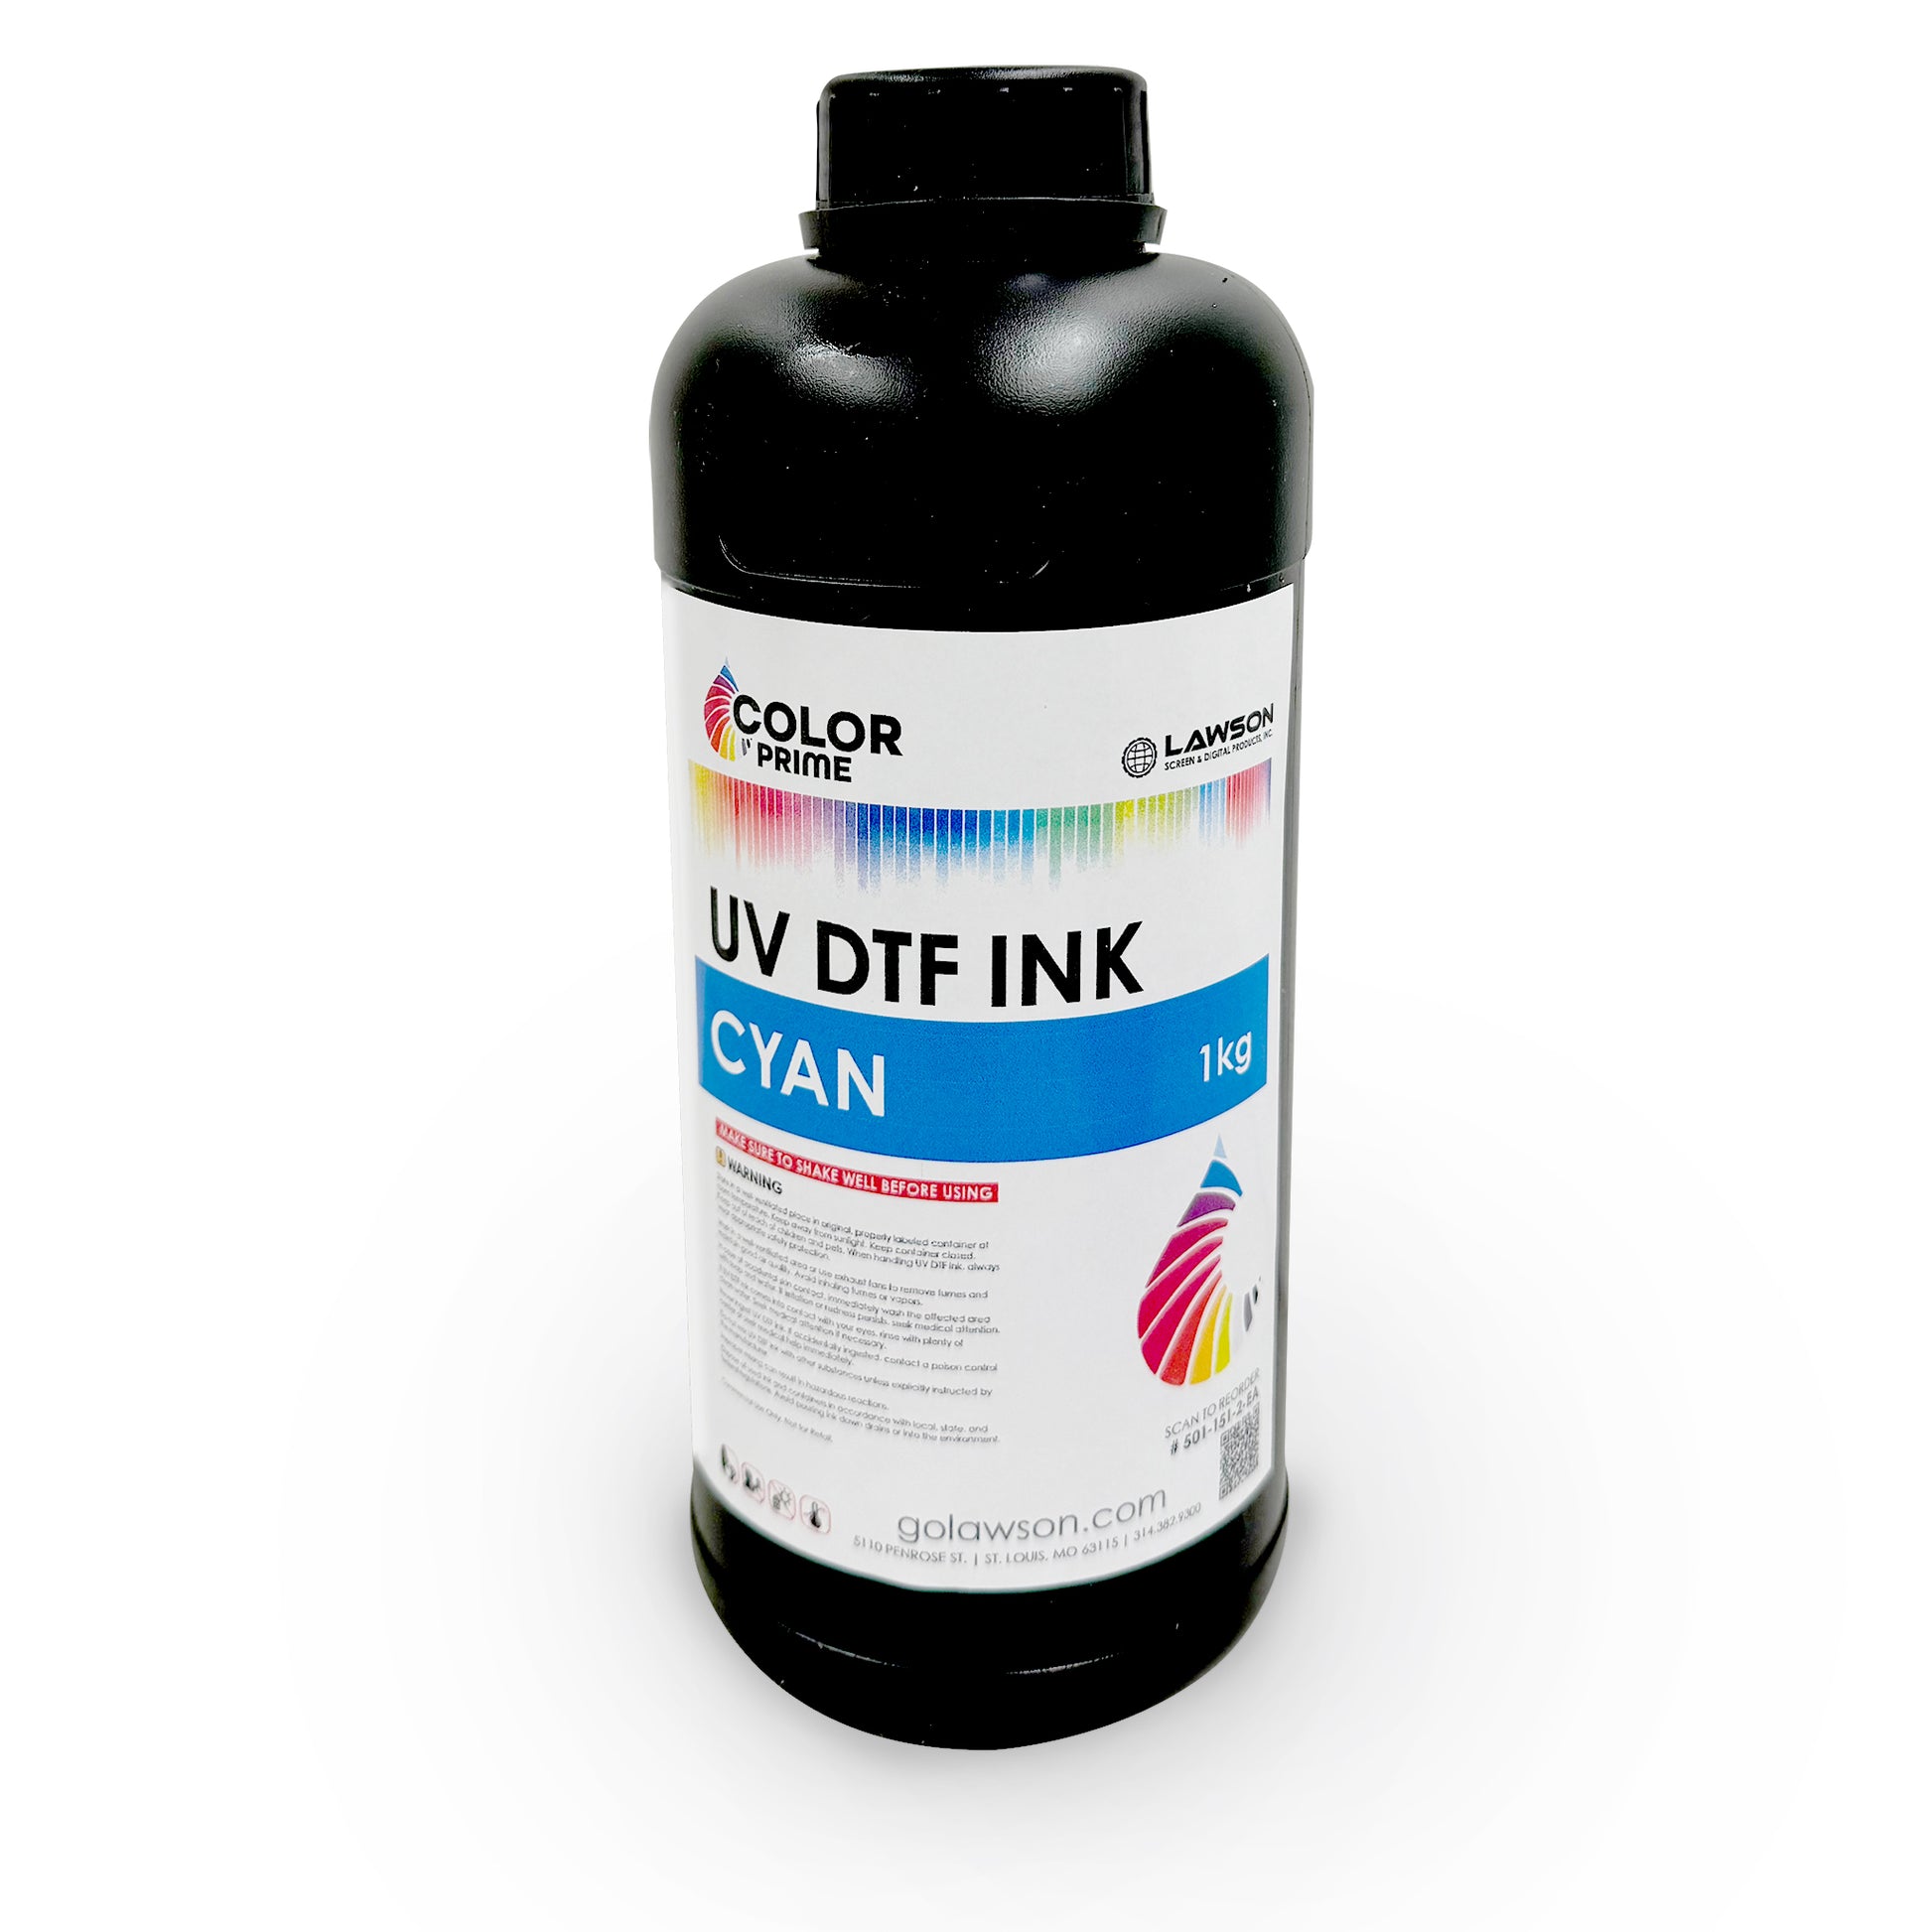 ColorPrime UV DTF Ink Cyan dtf printer screen printing direct to fabric equipment printers supplies platen ink maintenance cleaning